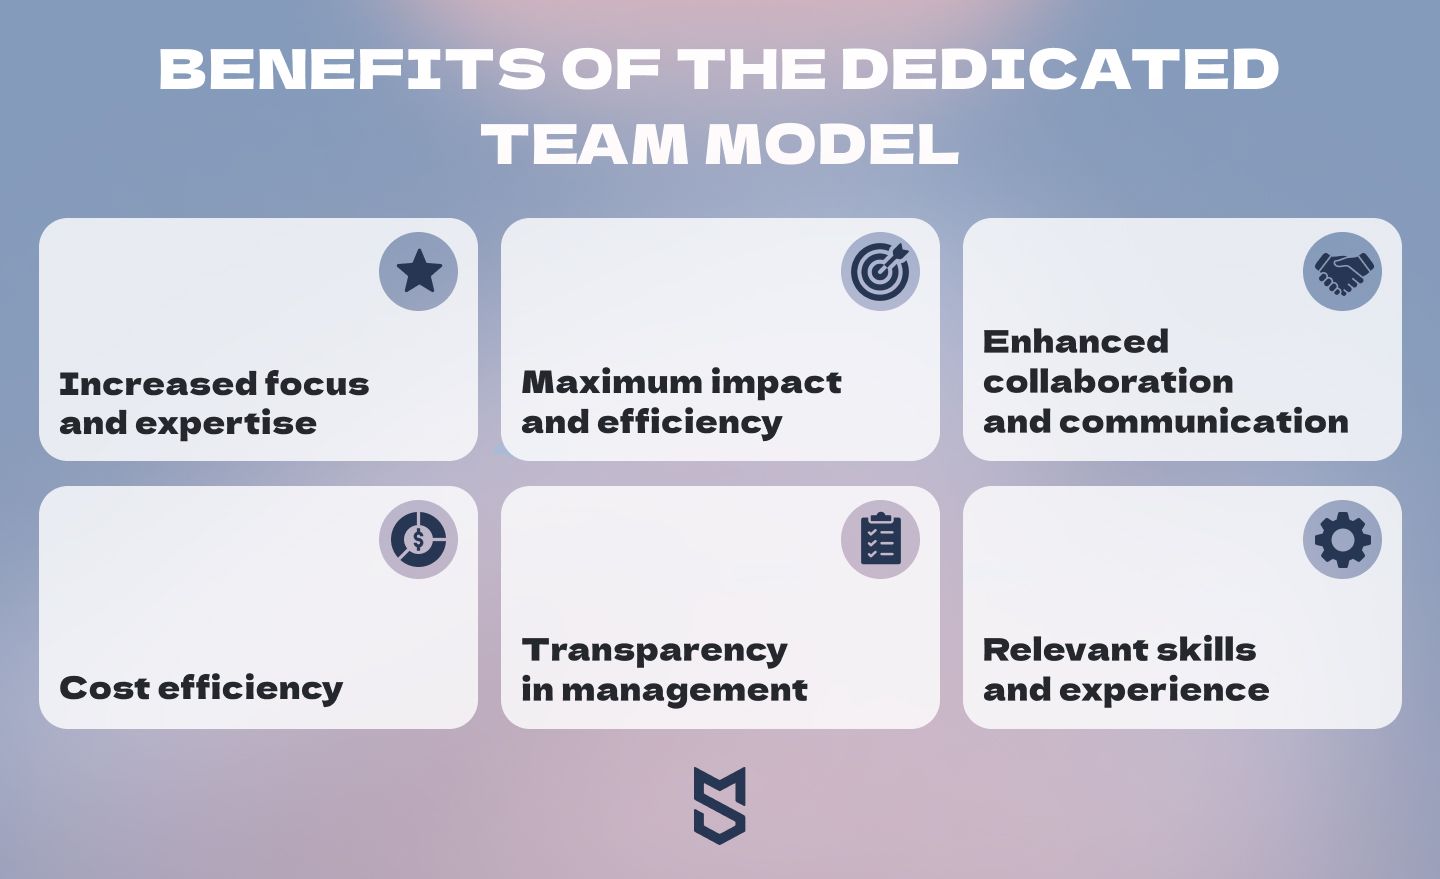 Benefits of the dedicated team model.